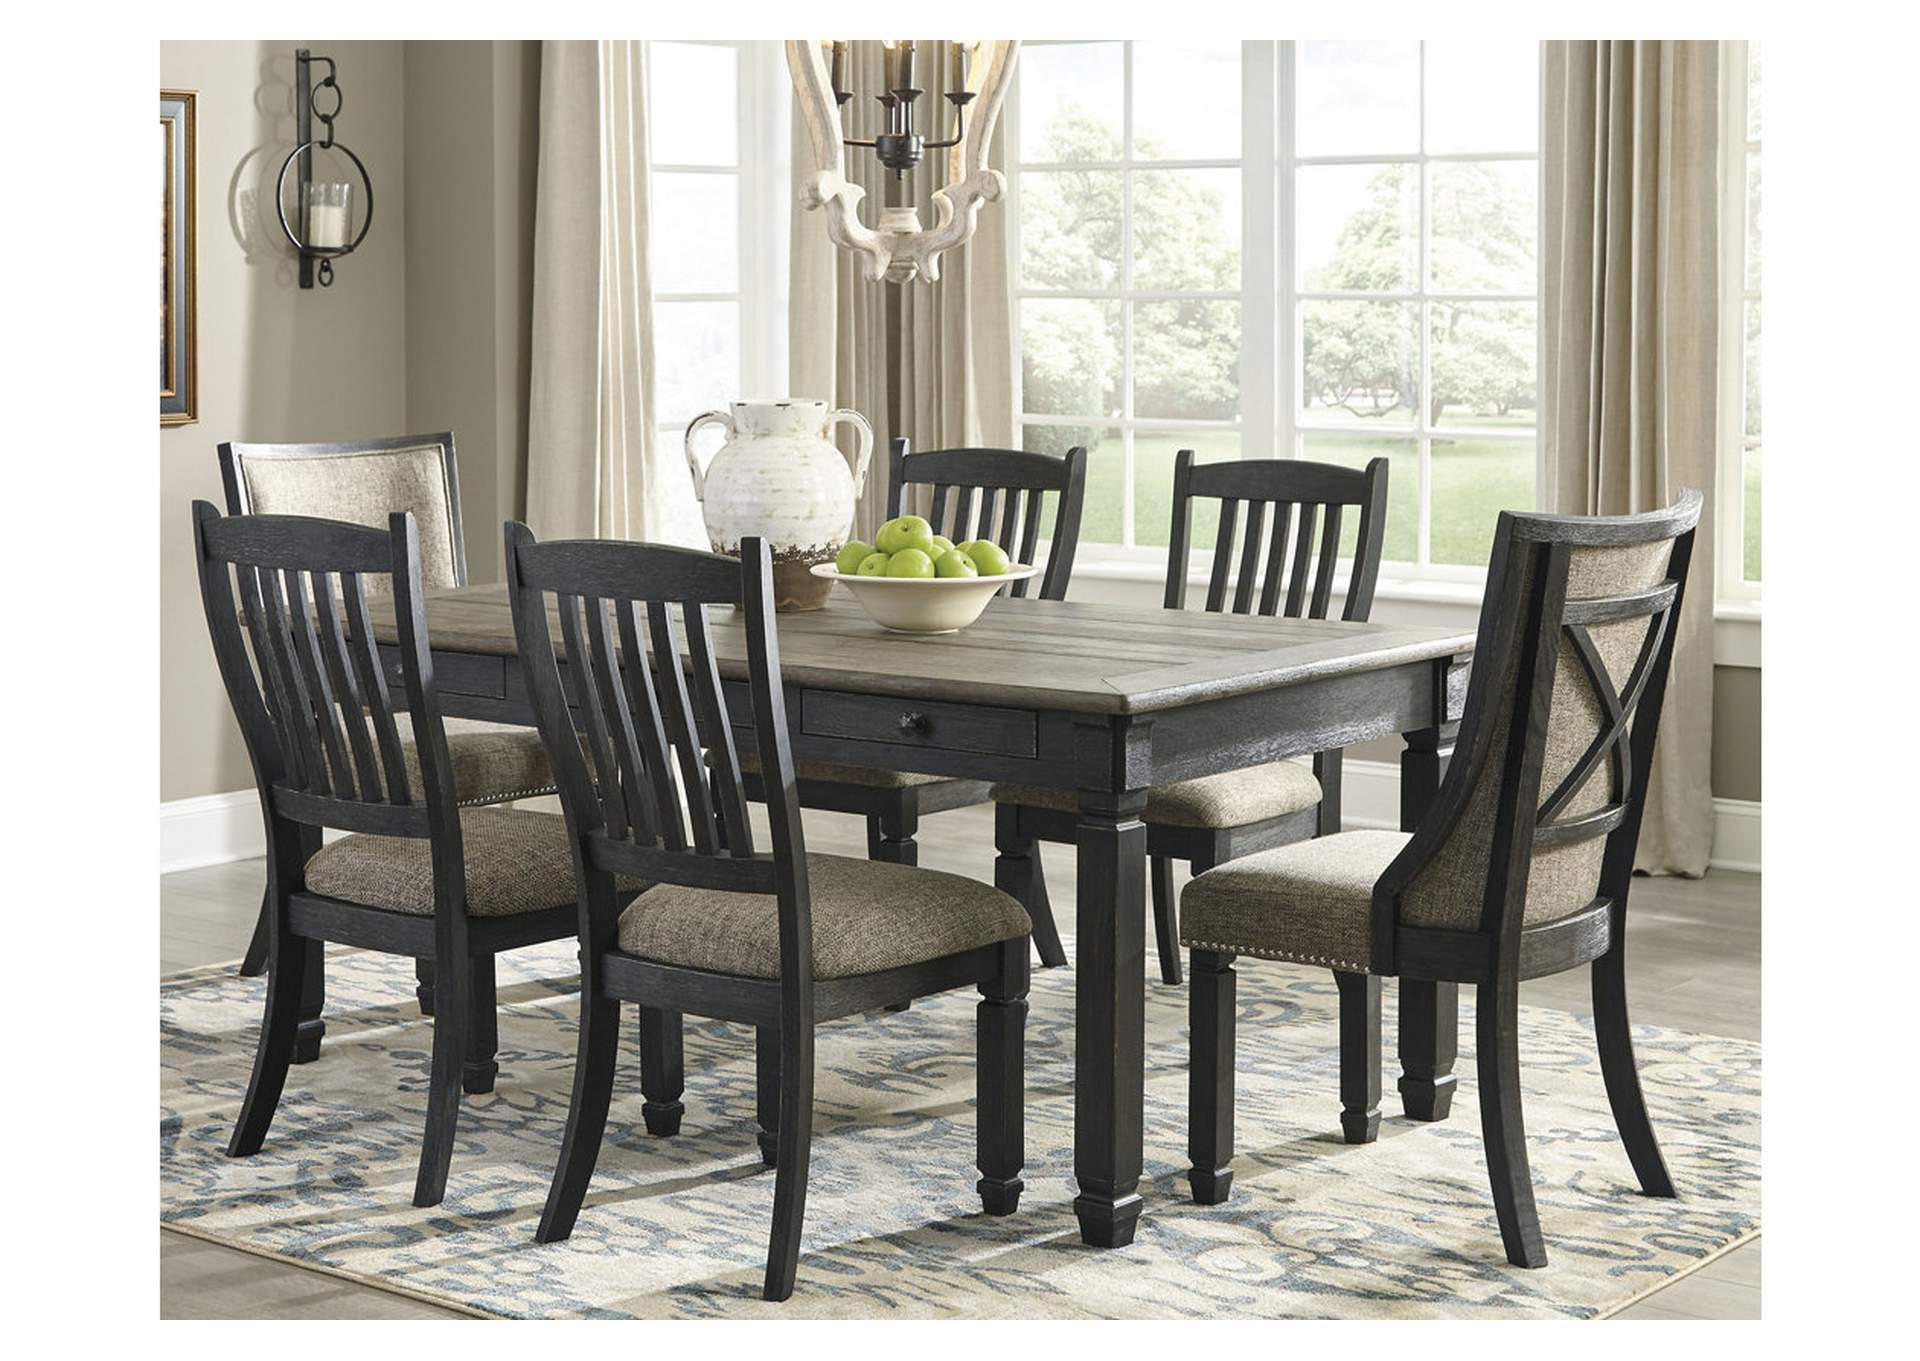 Tyler Creek Dining Table with 6 Chairs,Signature Design By Ashley